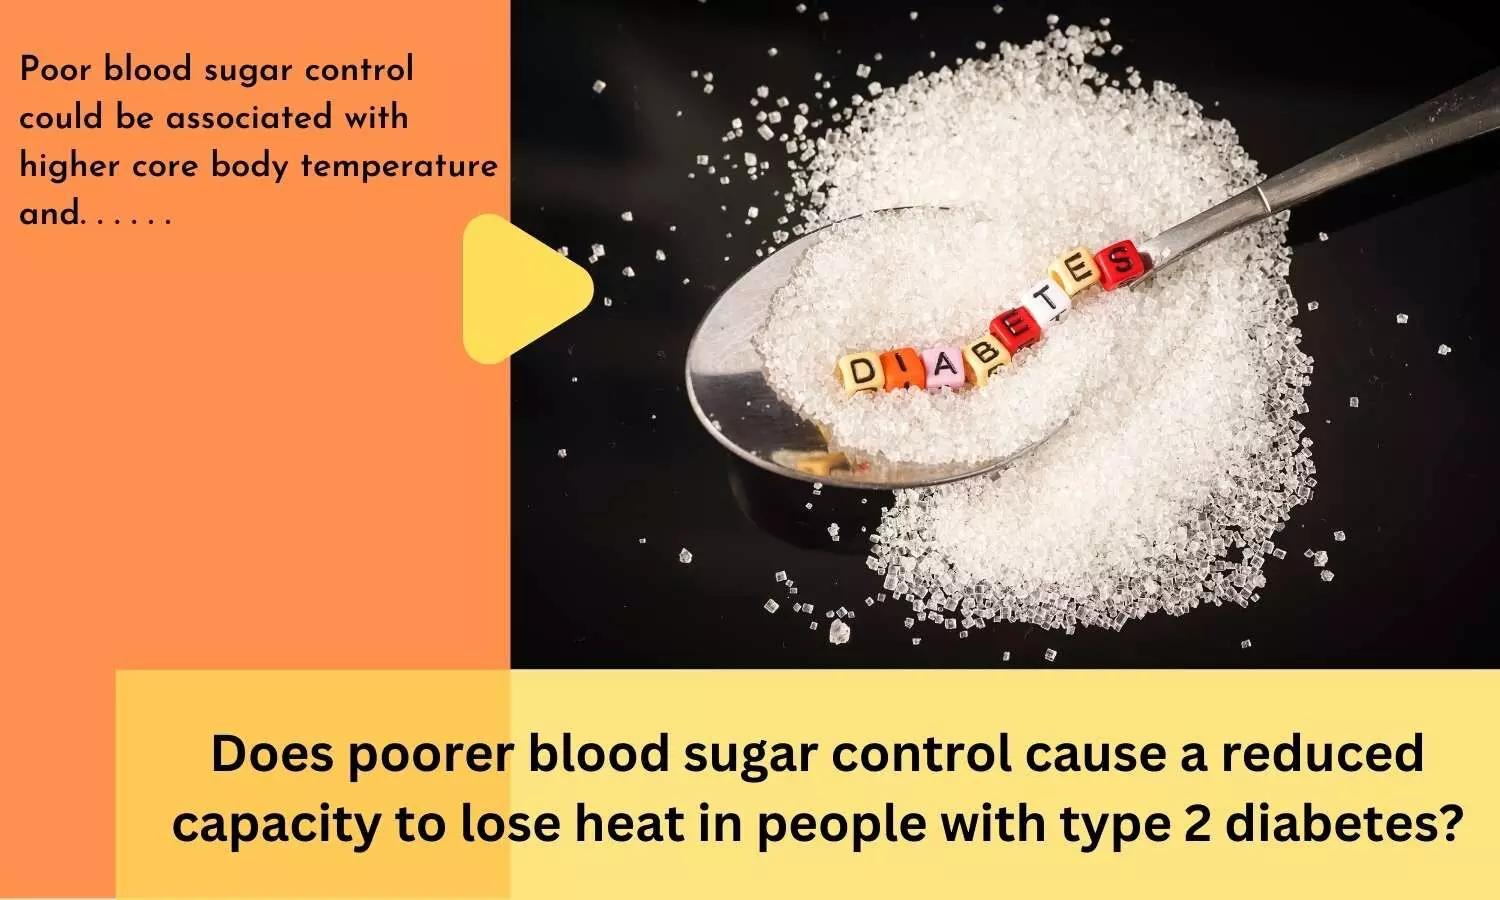 Does poorer blood sugar control cause a reduced capacity to lose heat in people with type 2 diabetes?